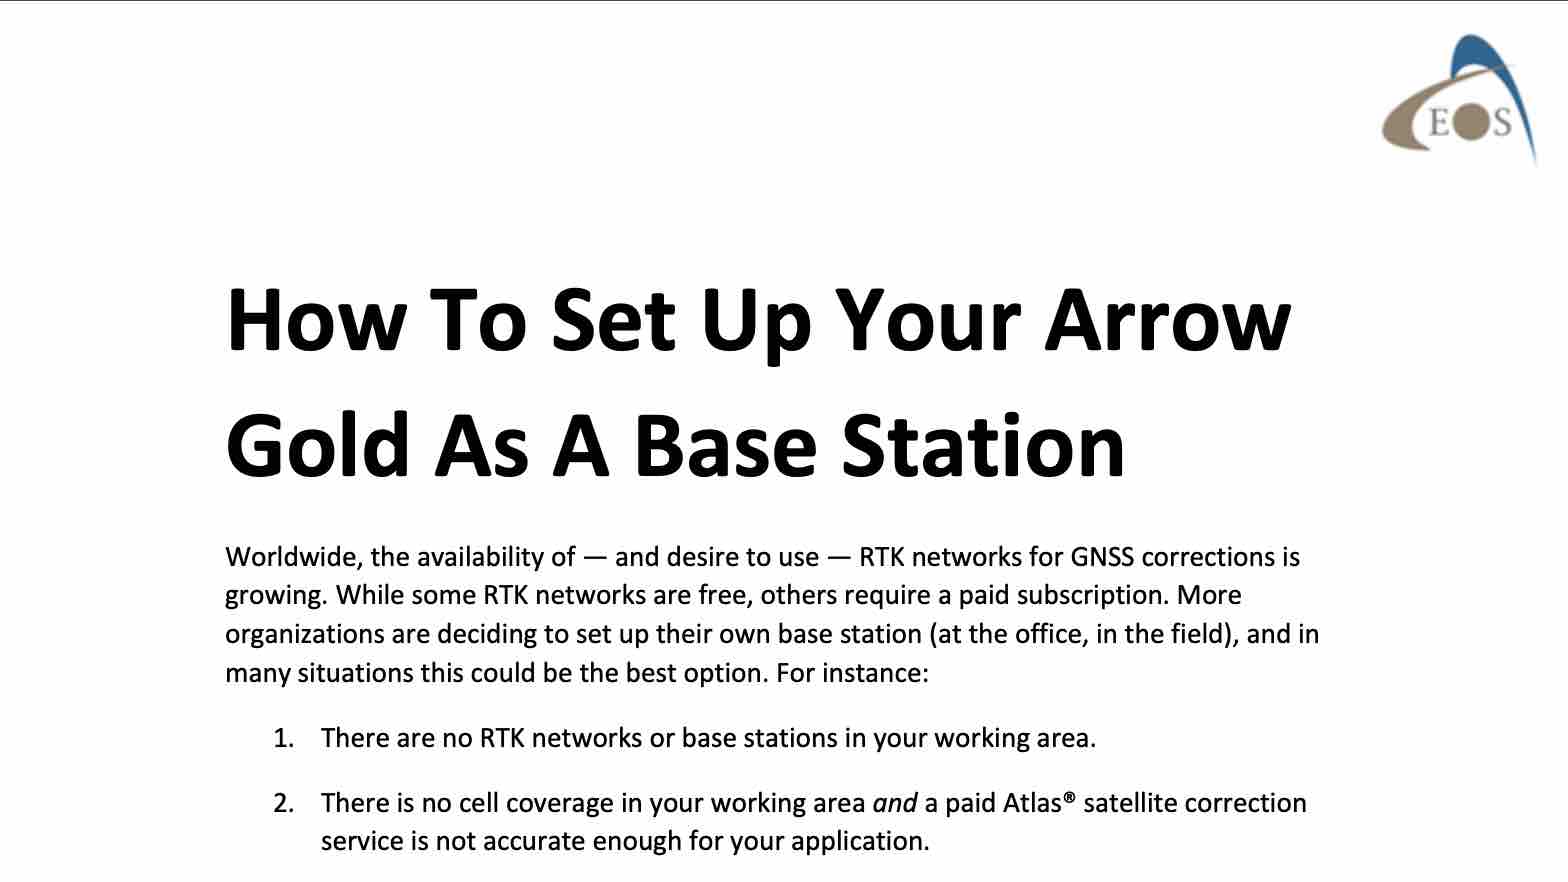 NEWSLETTER - PDF - HOW TO SET UP YOUR ARROW GOLD AS A BASE STATION